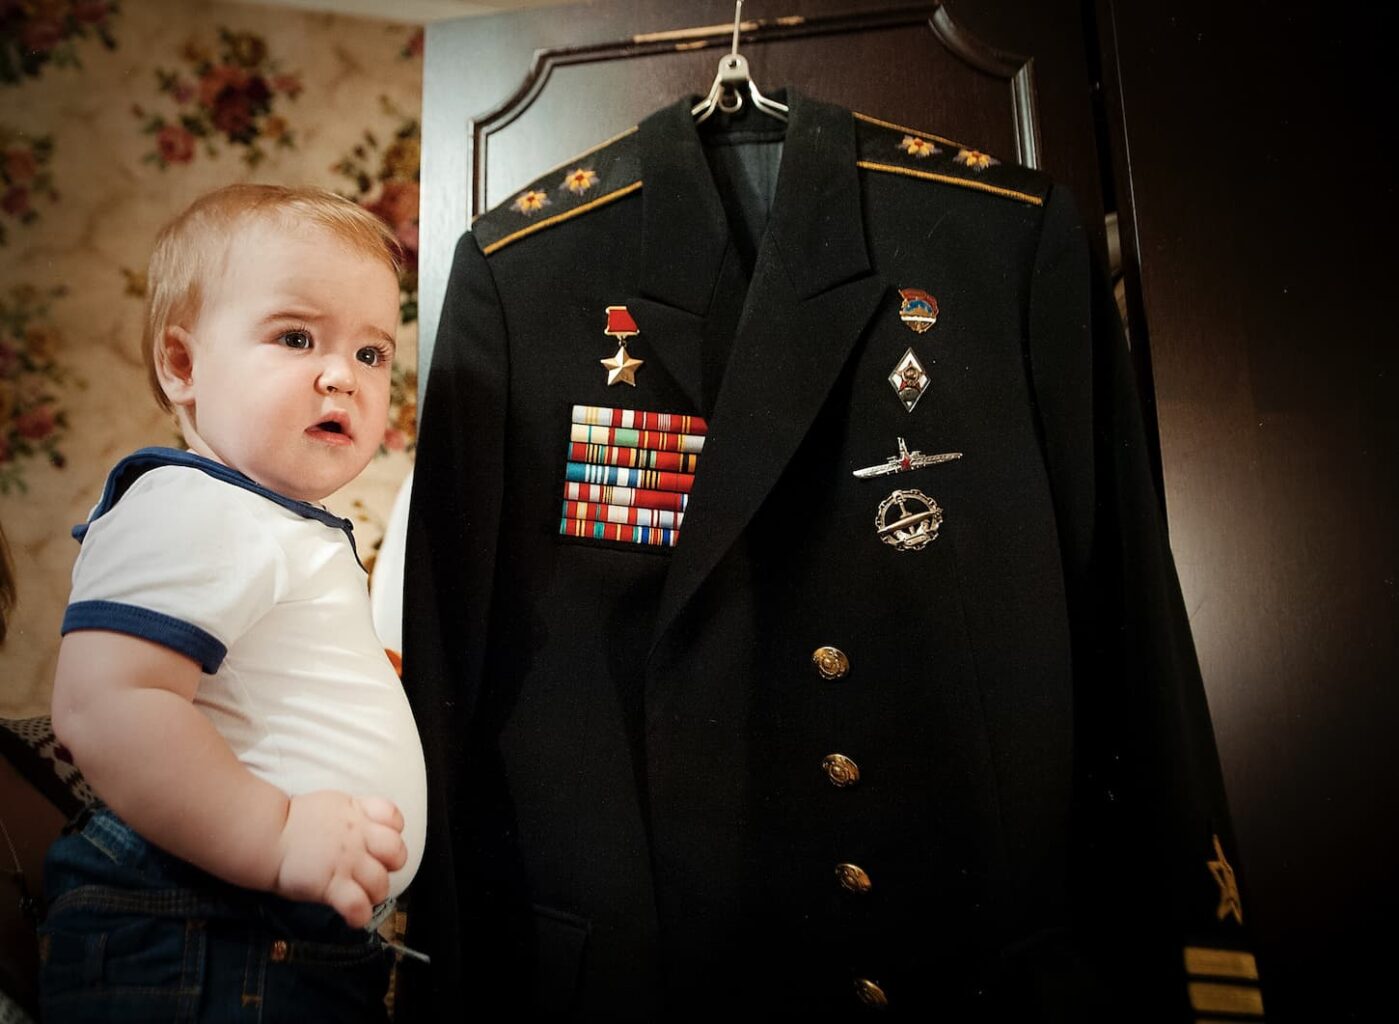 An image of a little girl with a great-grandfather's uniform.